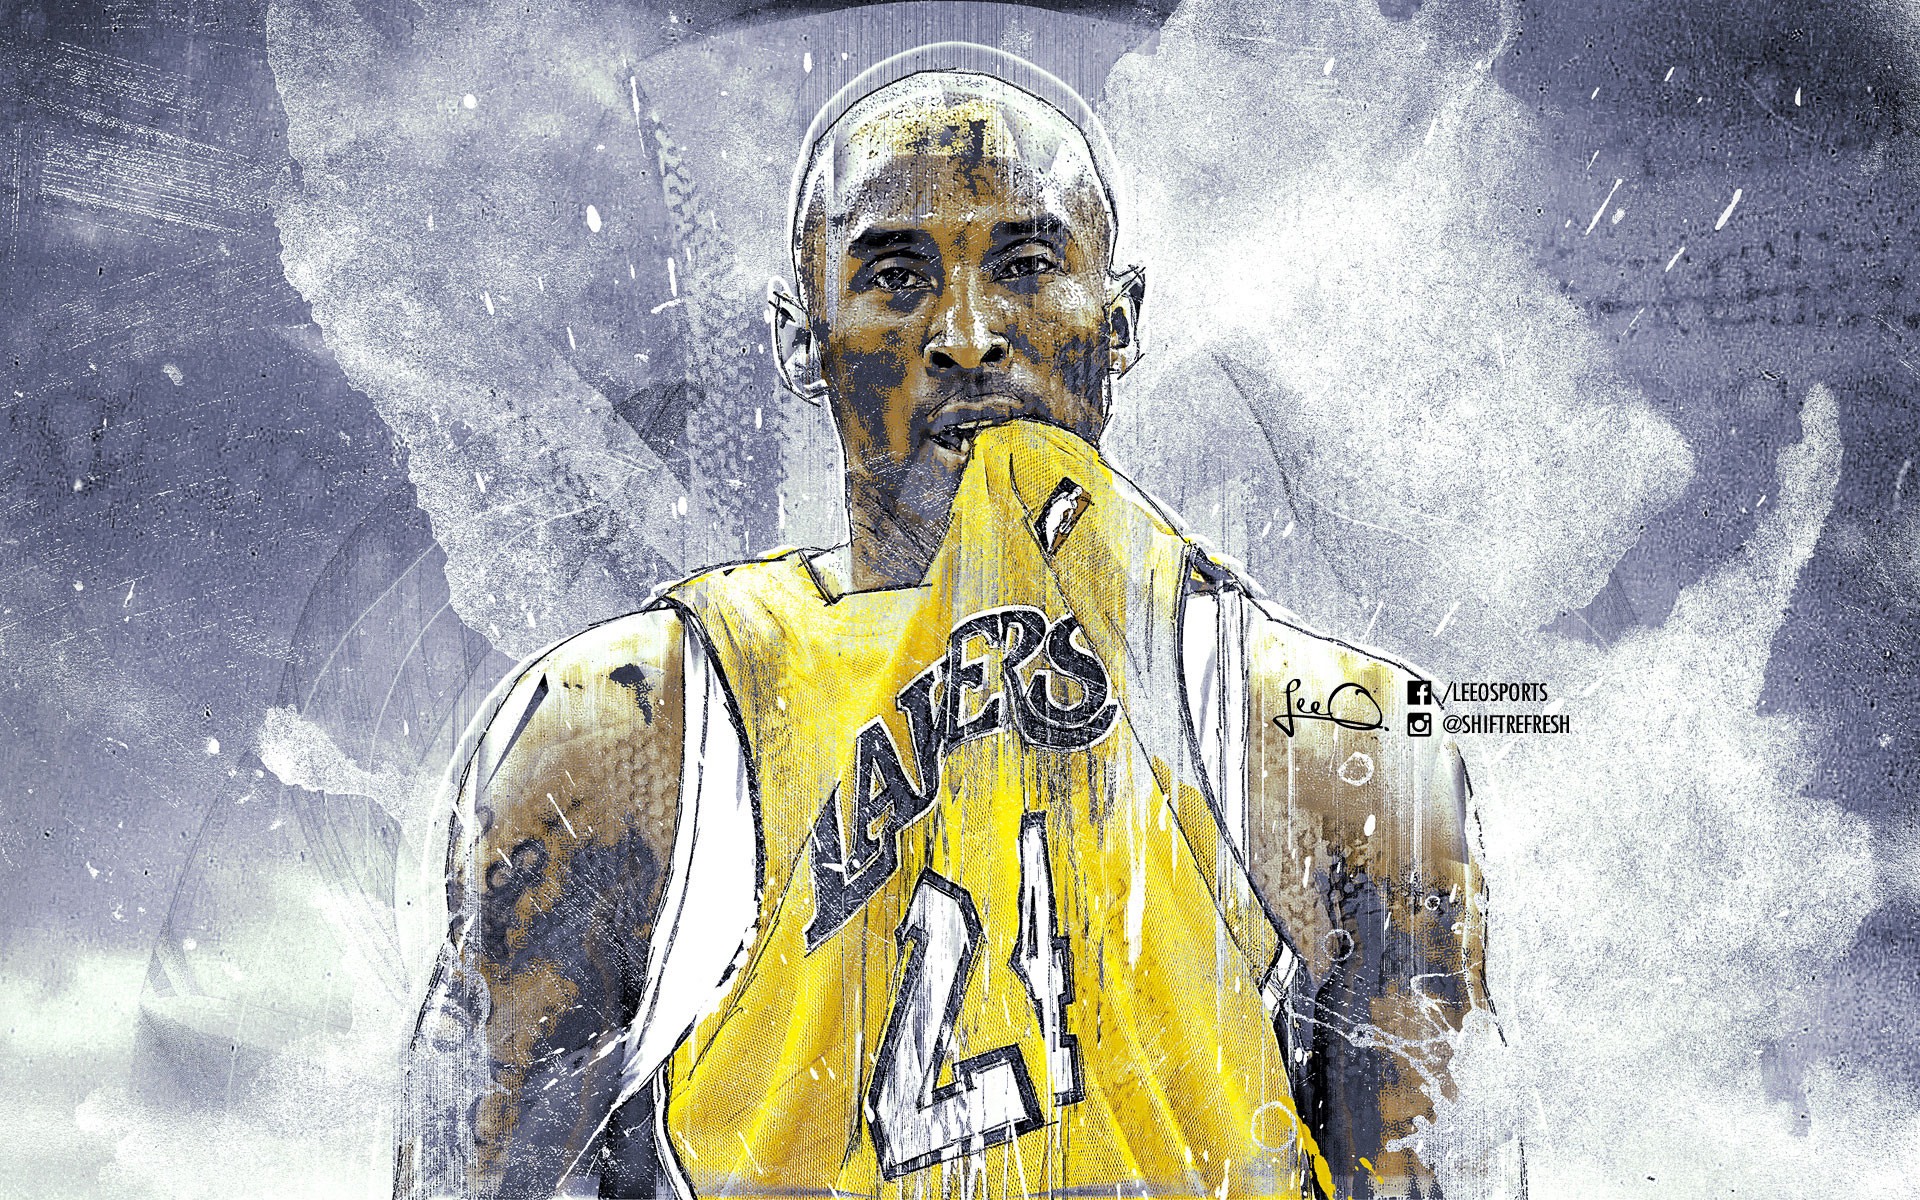 Kobe Bryant Wallpapers 73 pictures